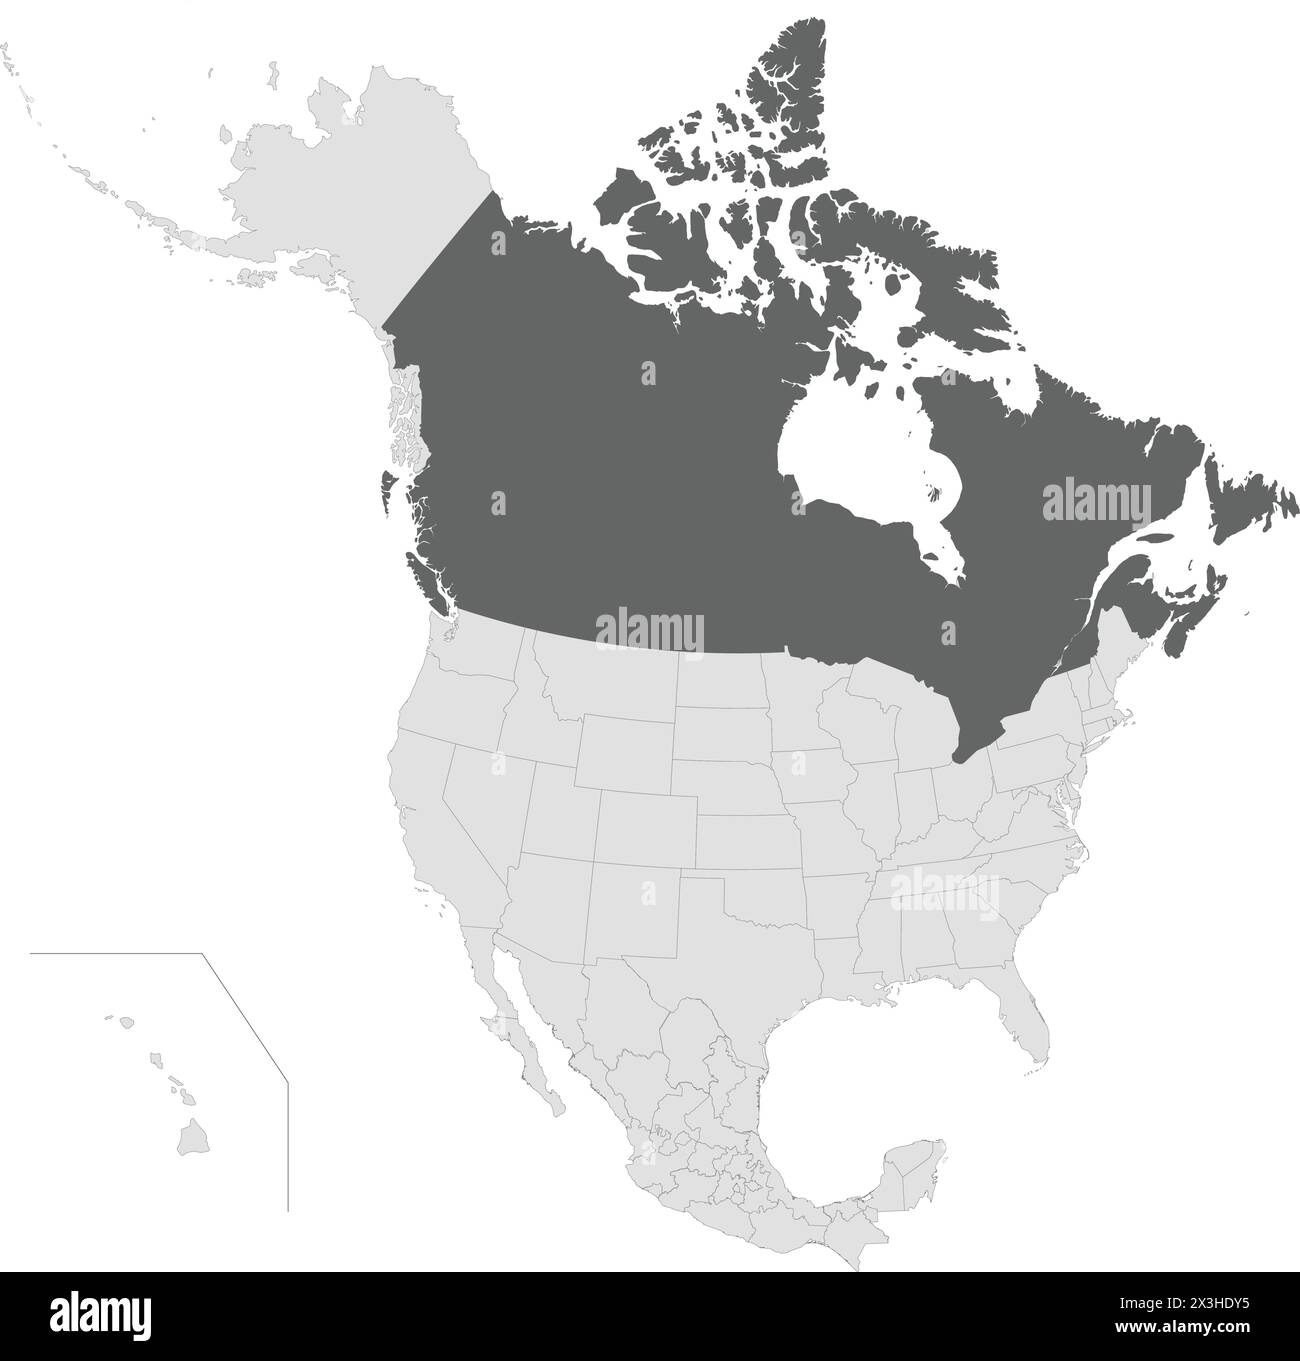 Dark grey map of CANADA inside light grey map of the North American continent Stock Vector